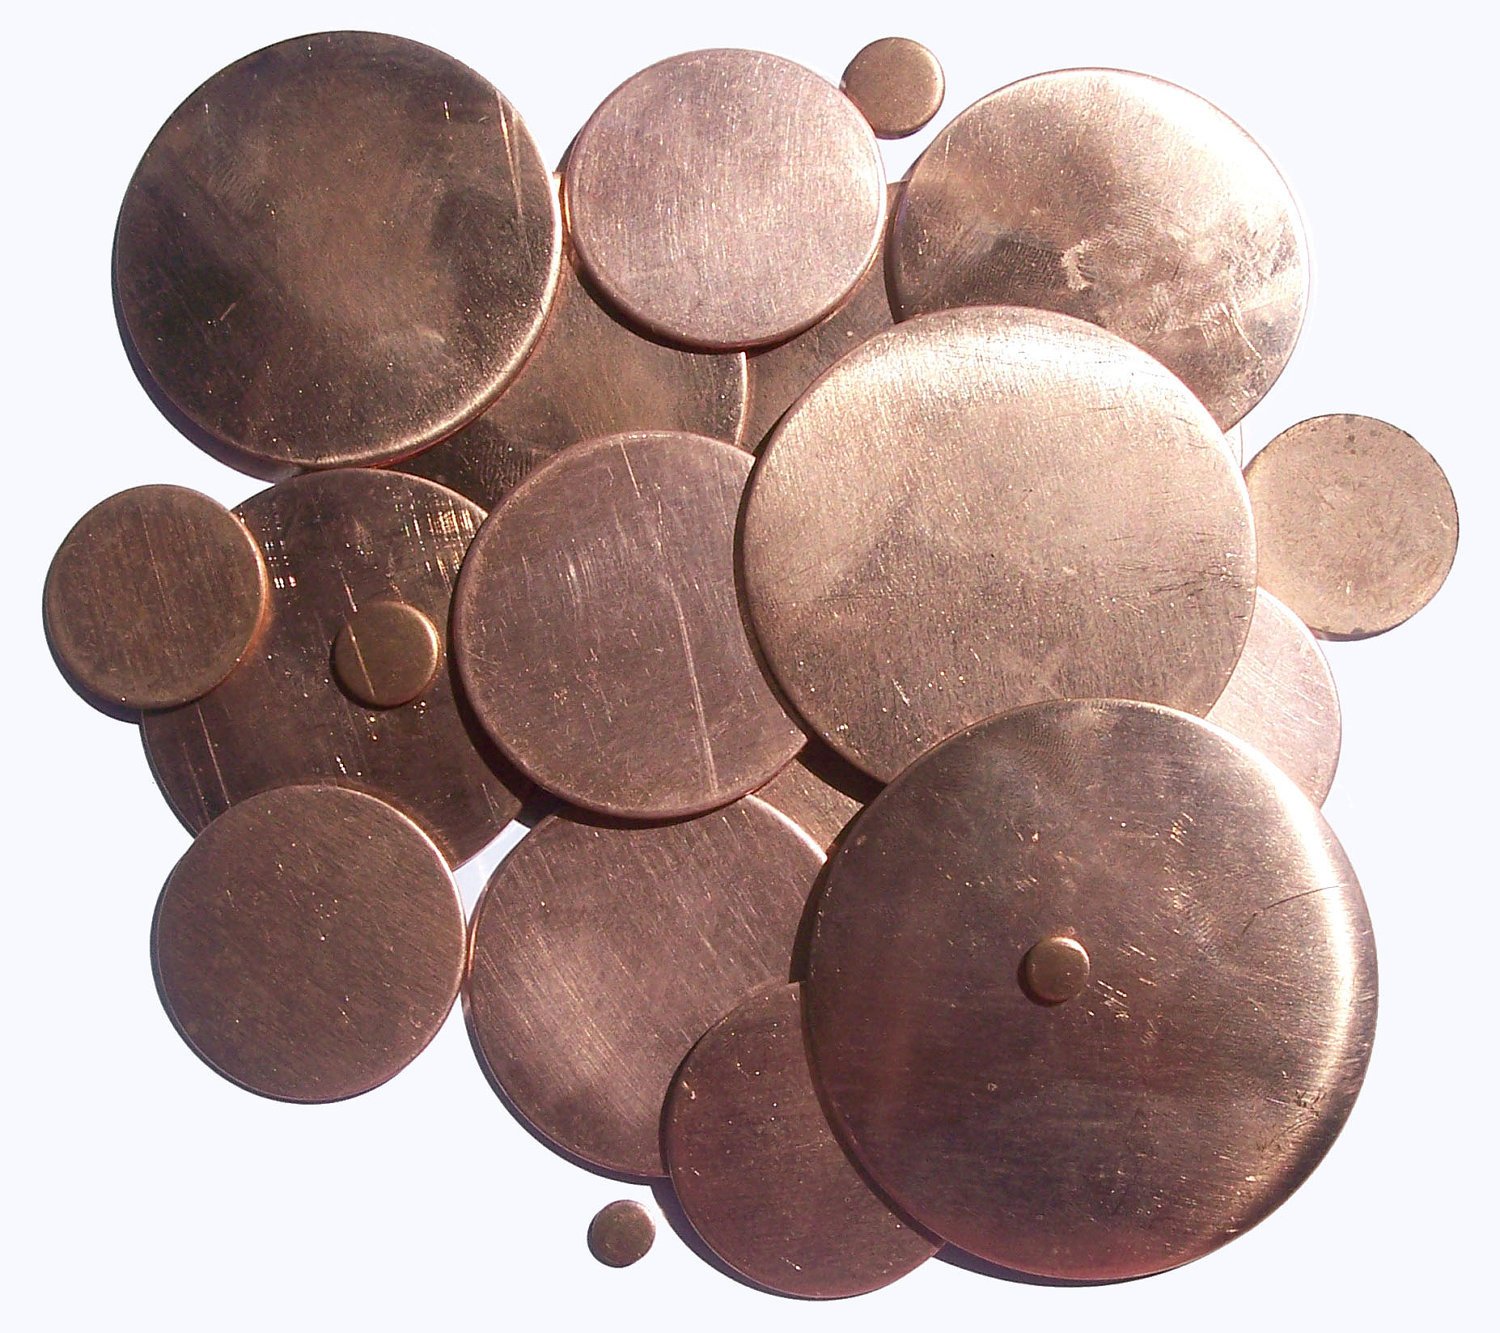 20mm Blank Disc 20G Cutout for Enameling Stamping Texturing Blanks - Metalworking Supply - 6 Pieces